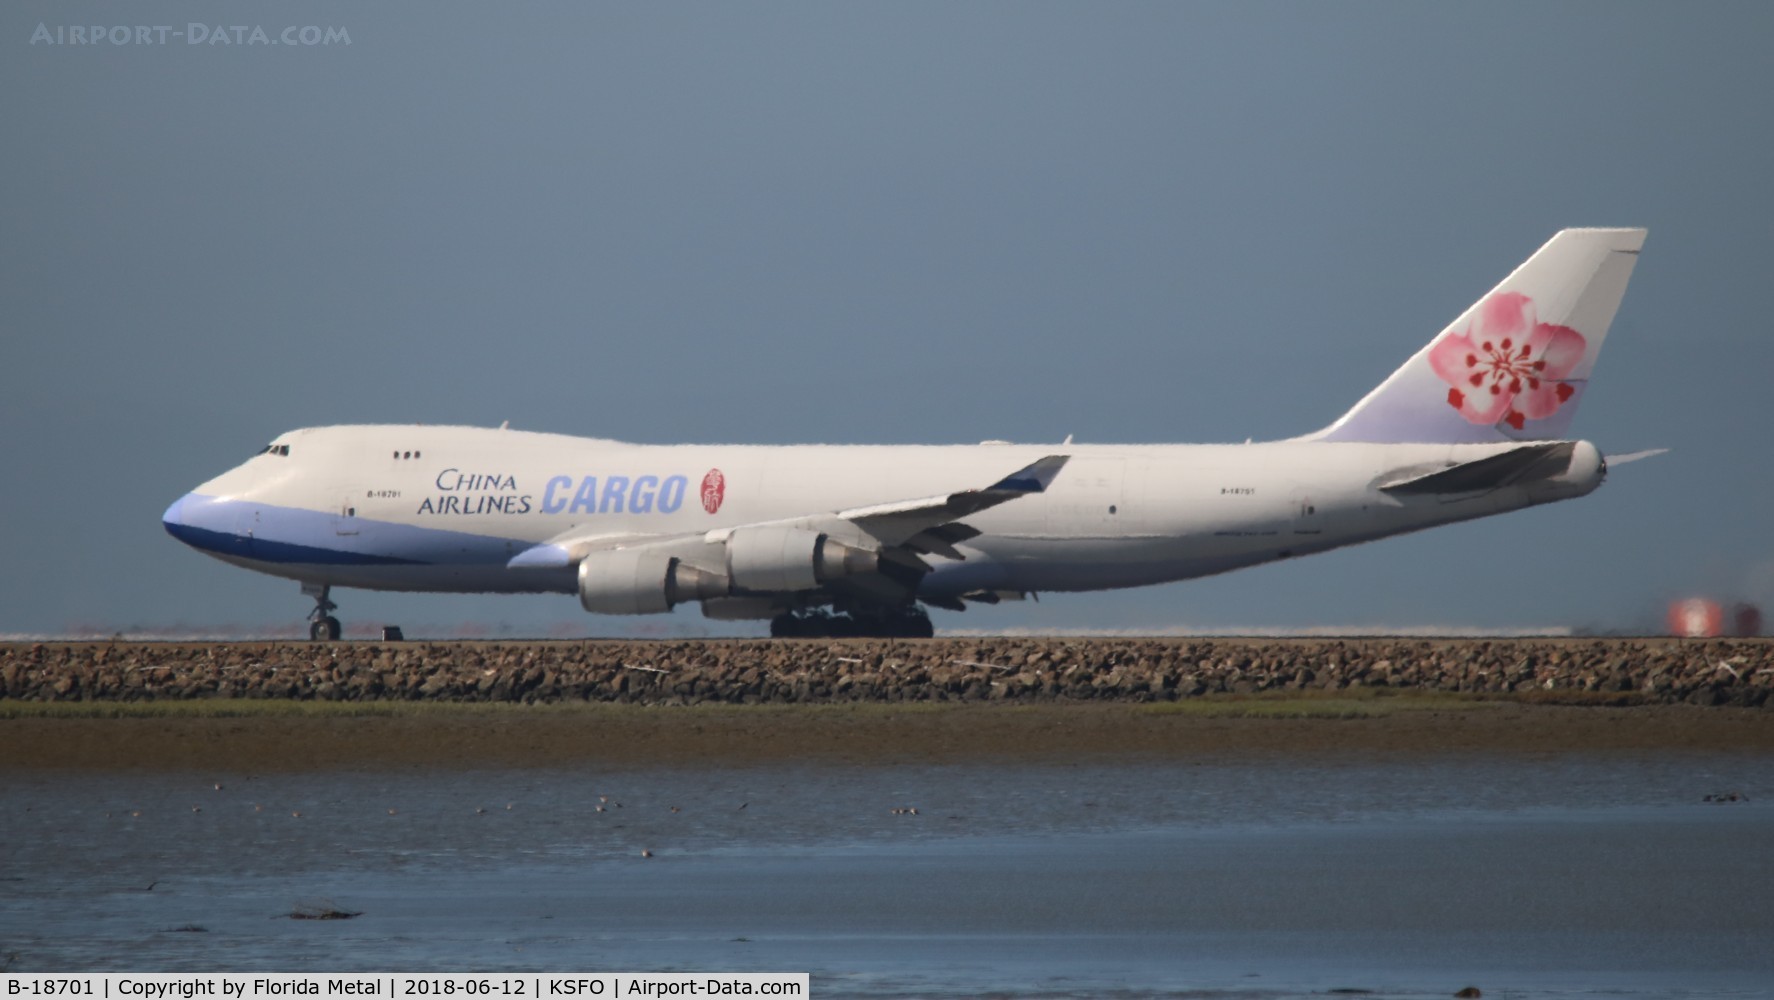 B-18701, 2000 Boeing 747-409F/SCD C/N 30759, China Airlines Cargo 747-400F zx